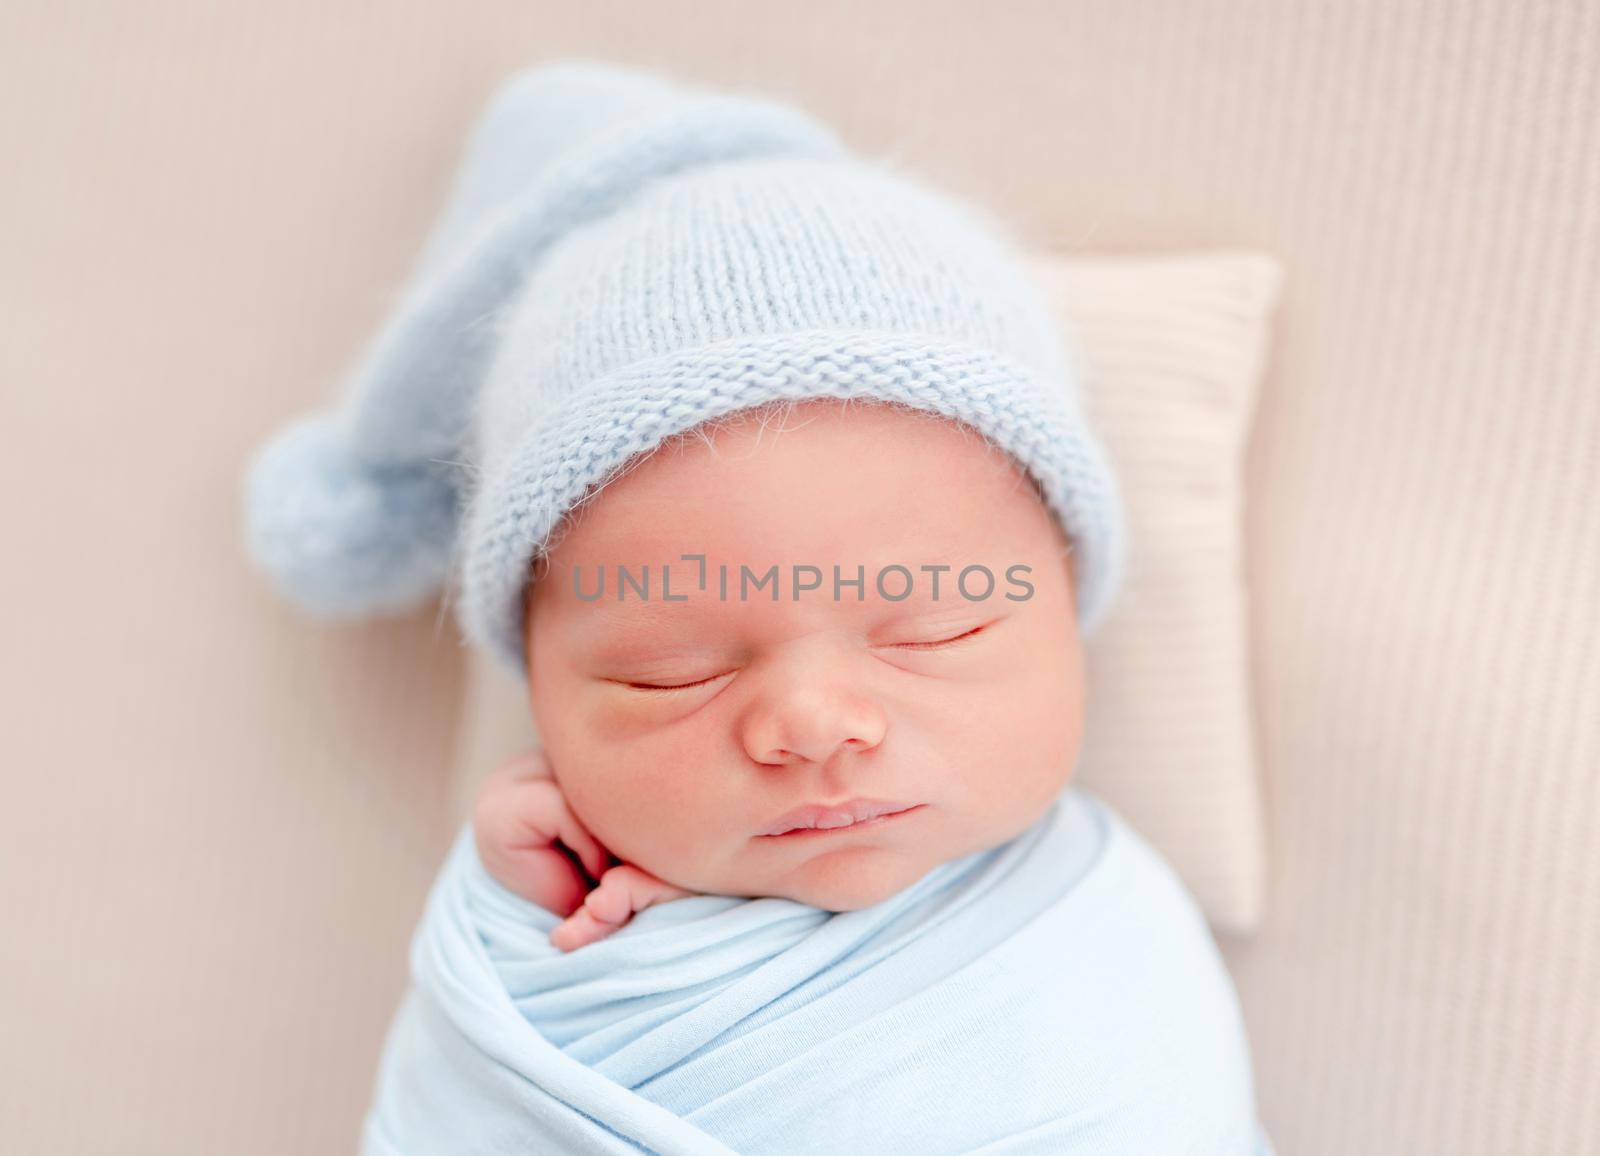 Portrait of newborn baby boy swaddled in light blue fabric and wearing knitted hat sleeping on white background and holding tiny hands under his cheeks. Adorable infant child napping